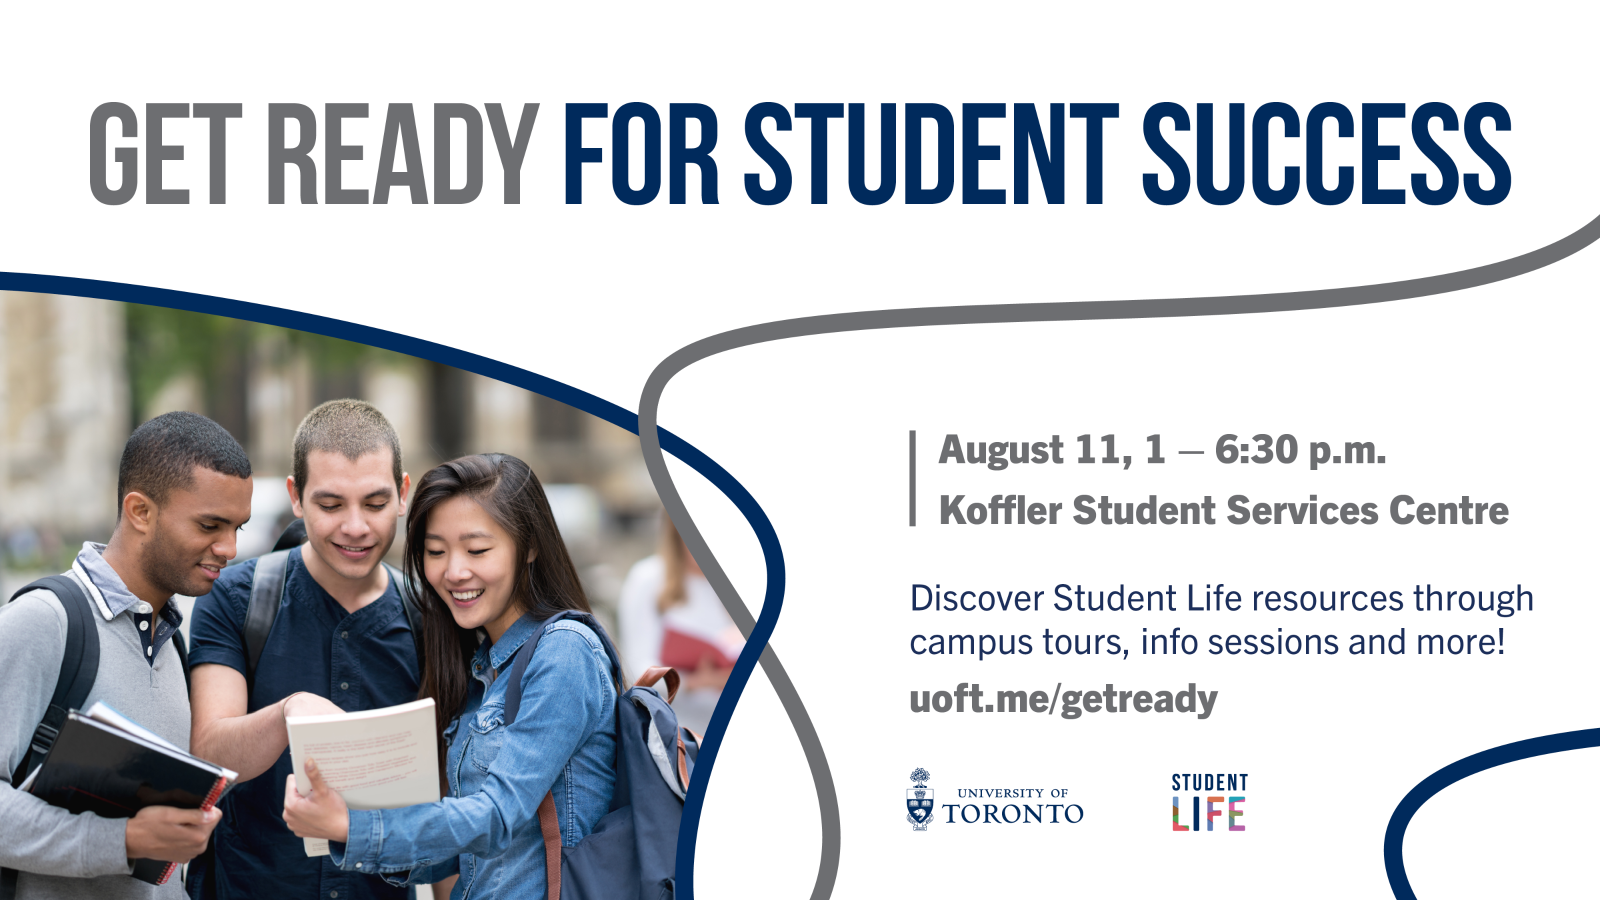 Student Success Centre Open House on August 11 from 1 - 6:30pm